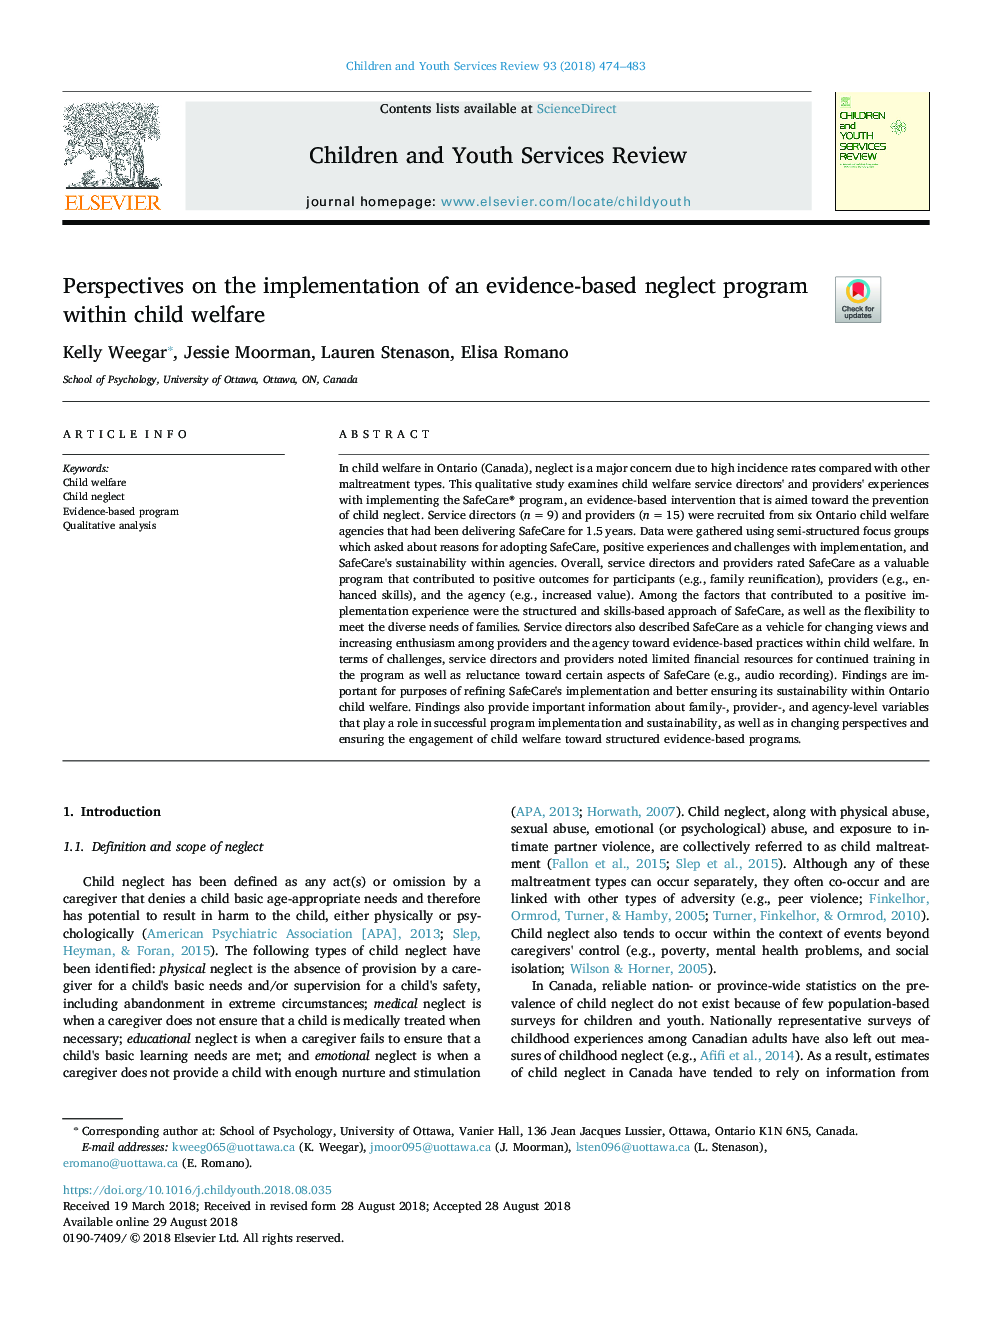 Perspectives on the implementation of an evidence-based neglect program within child welfare